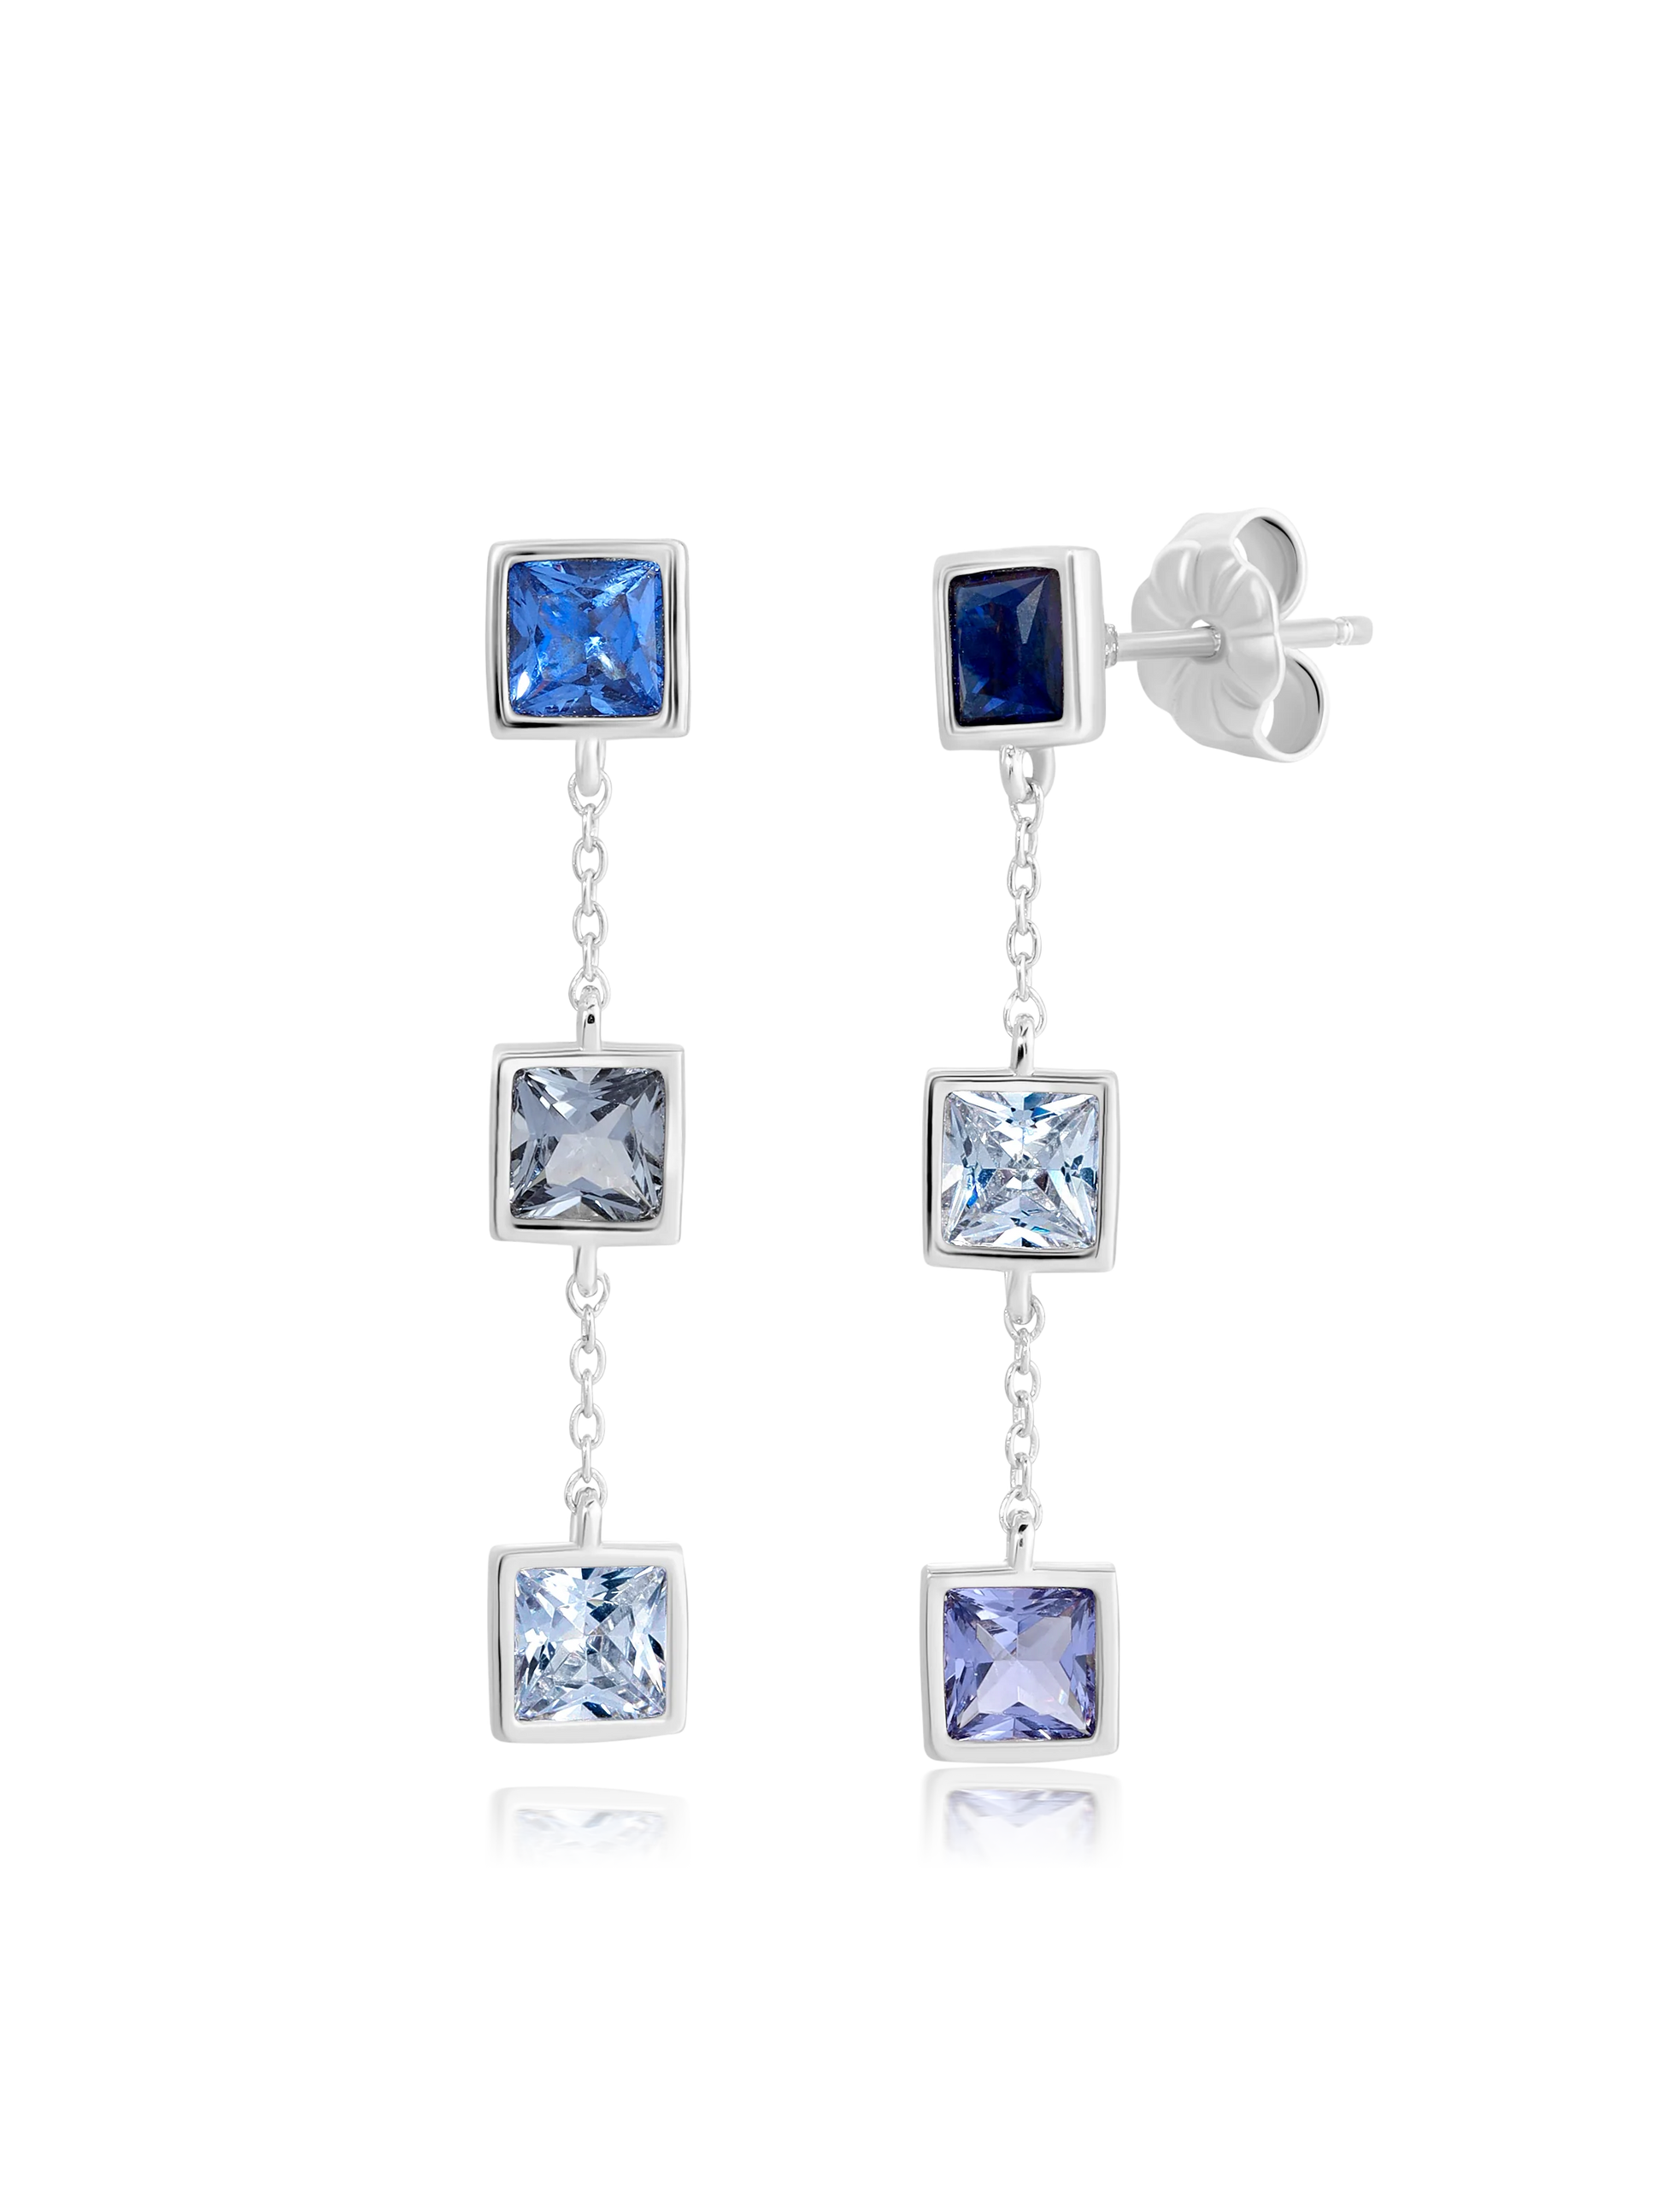 Square Princess Cut Sm Linear Periwinkle Colored Stone Earrings